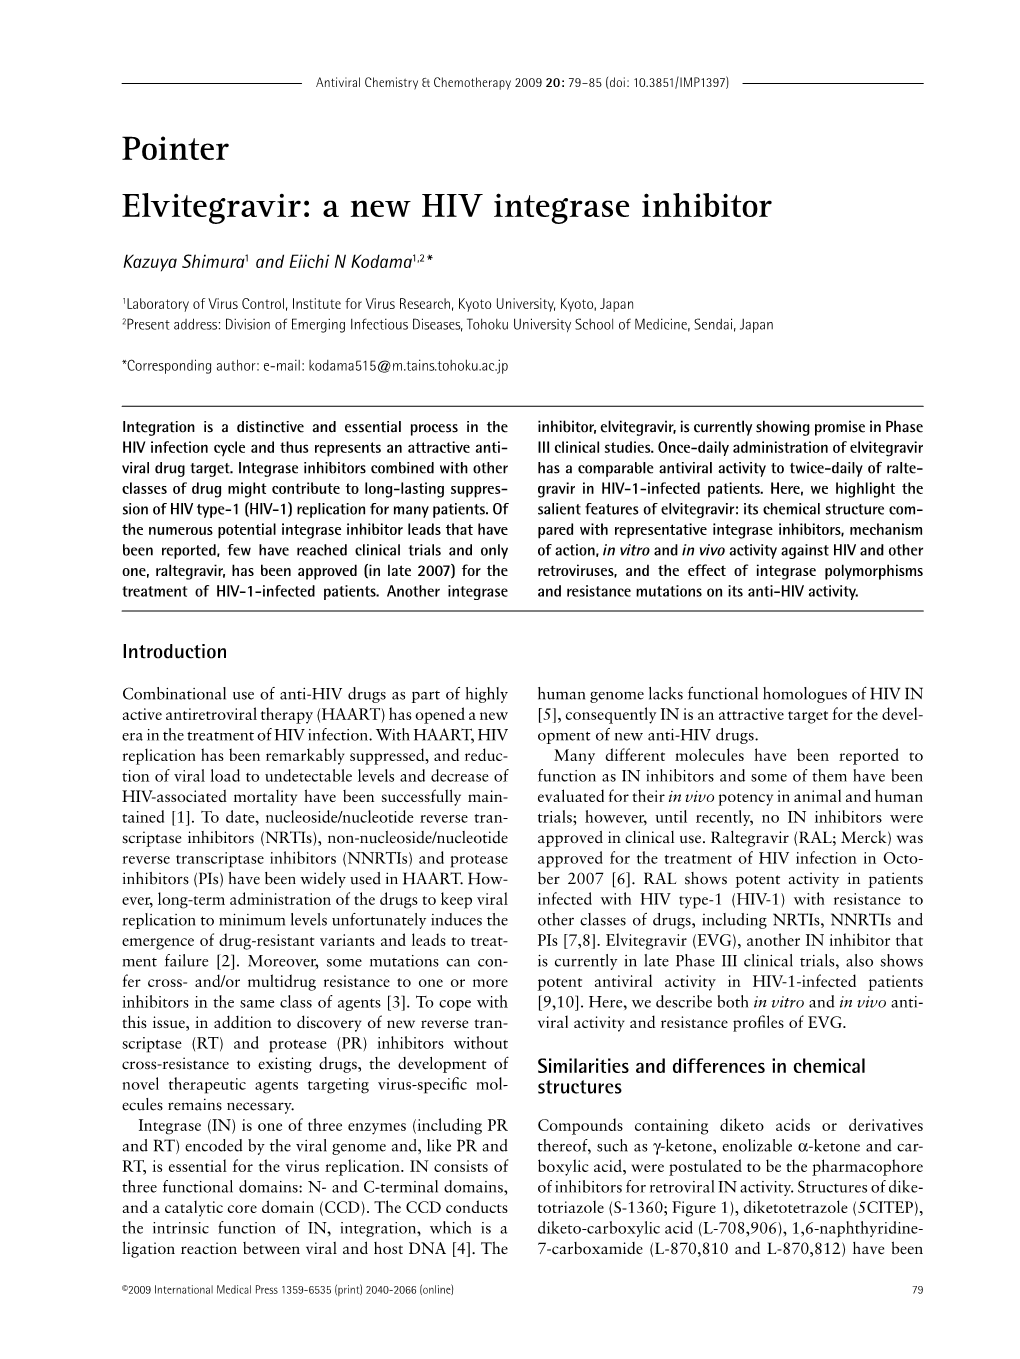 A New HIV Integrase Inhibitor